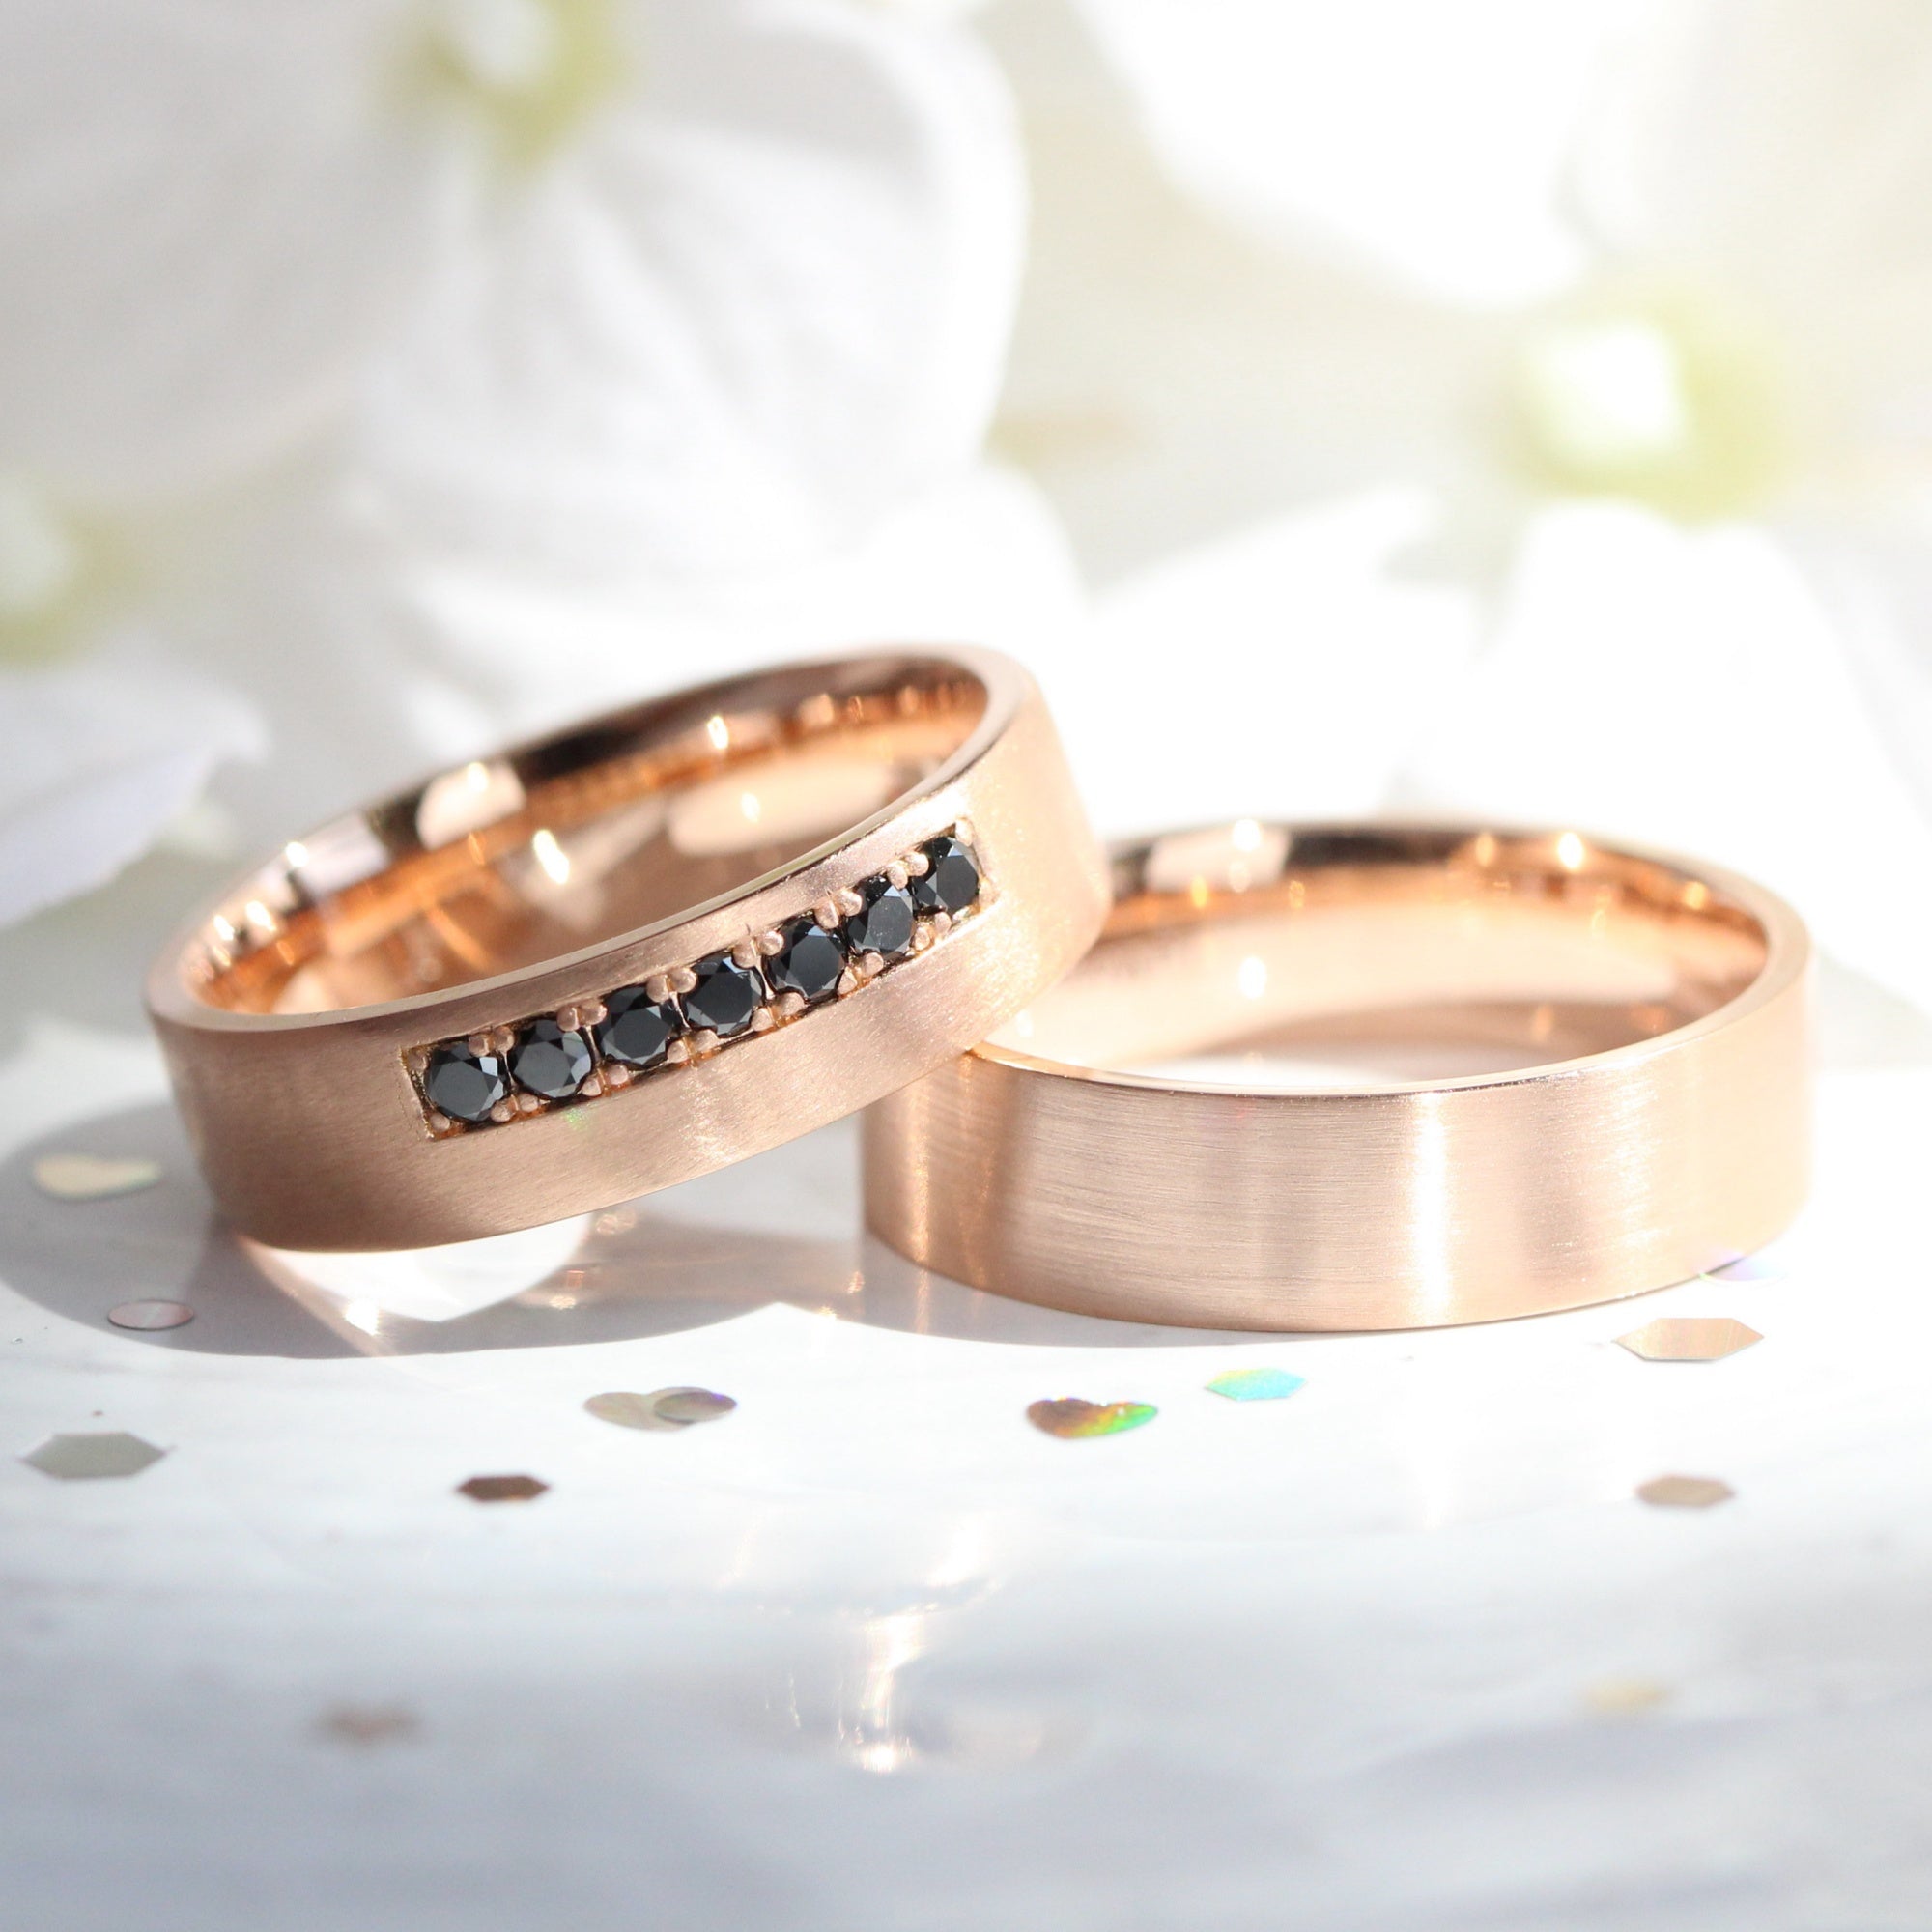 Beautiful Matching Wedding Bands With Diamonds in Her Ring. Unique Wedding  Bands. - Etsy | Wedding rings sets his and hers, Wedding ring bands, Wedding  rings unique